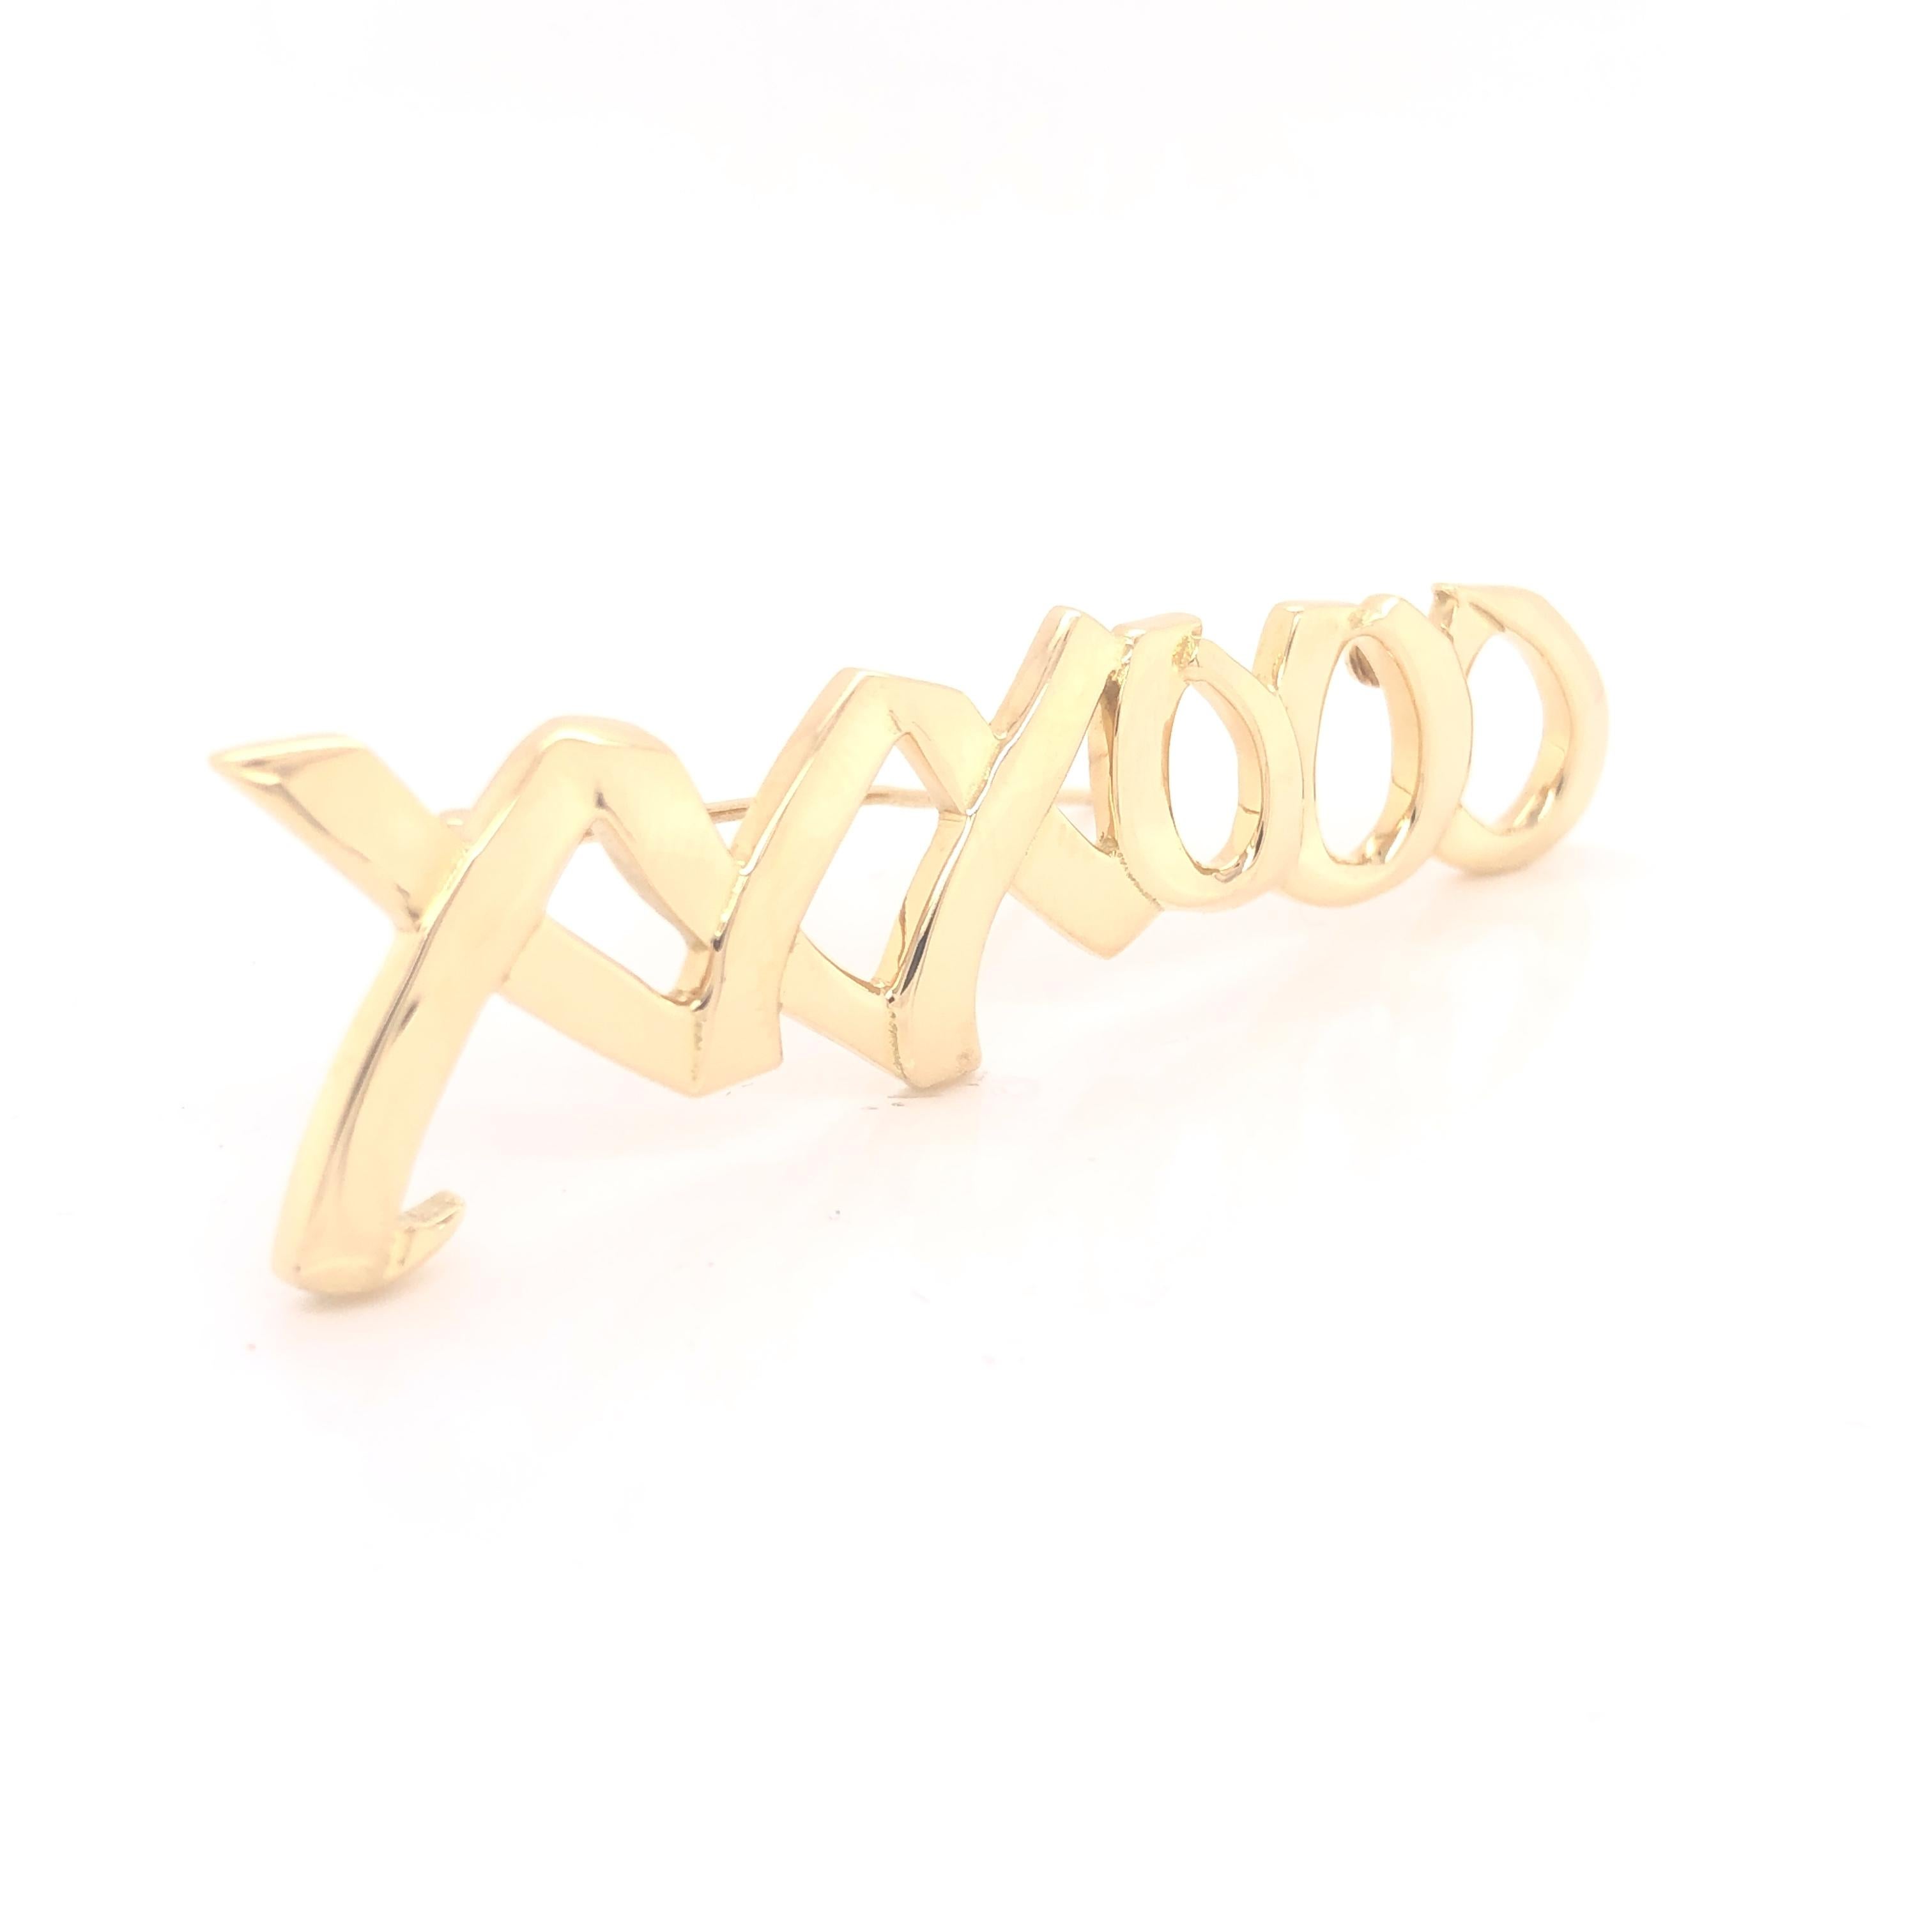 Tiffany & Co. Paloma Picasso 18K Gold XXXOOO Pin. This beautiful estate Tiffany & Co. Paloma Picasso pin is crafted in solid 18K yellow gold. From her famous Graffiti collection, Paloma Picasso's signature design is the universal symbol for love and